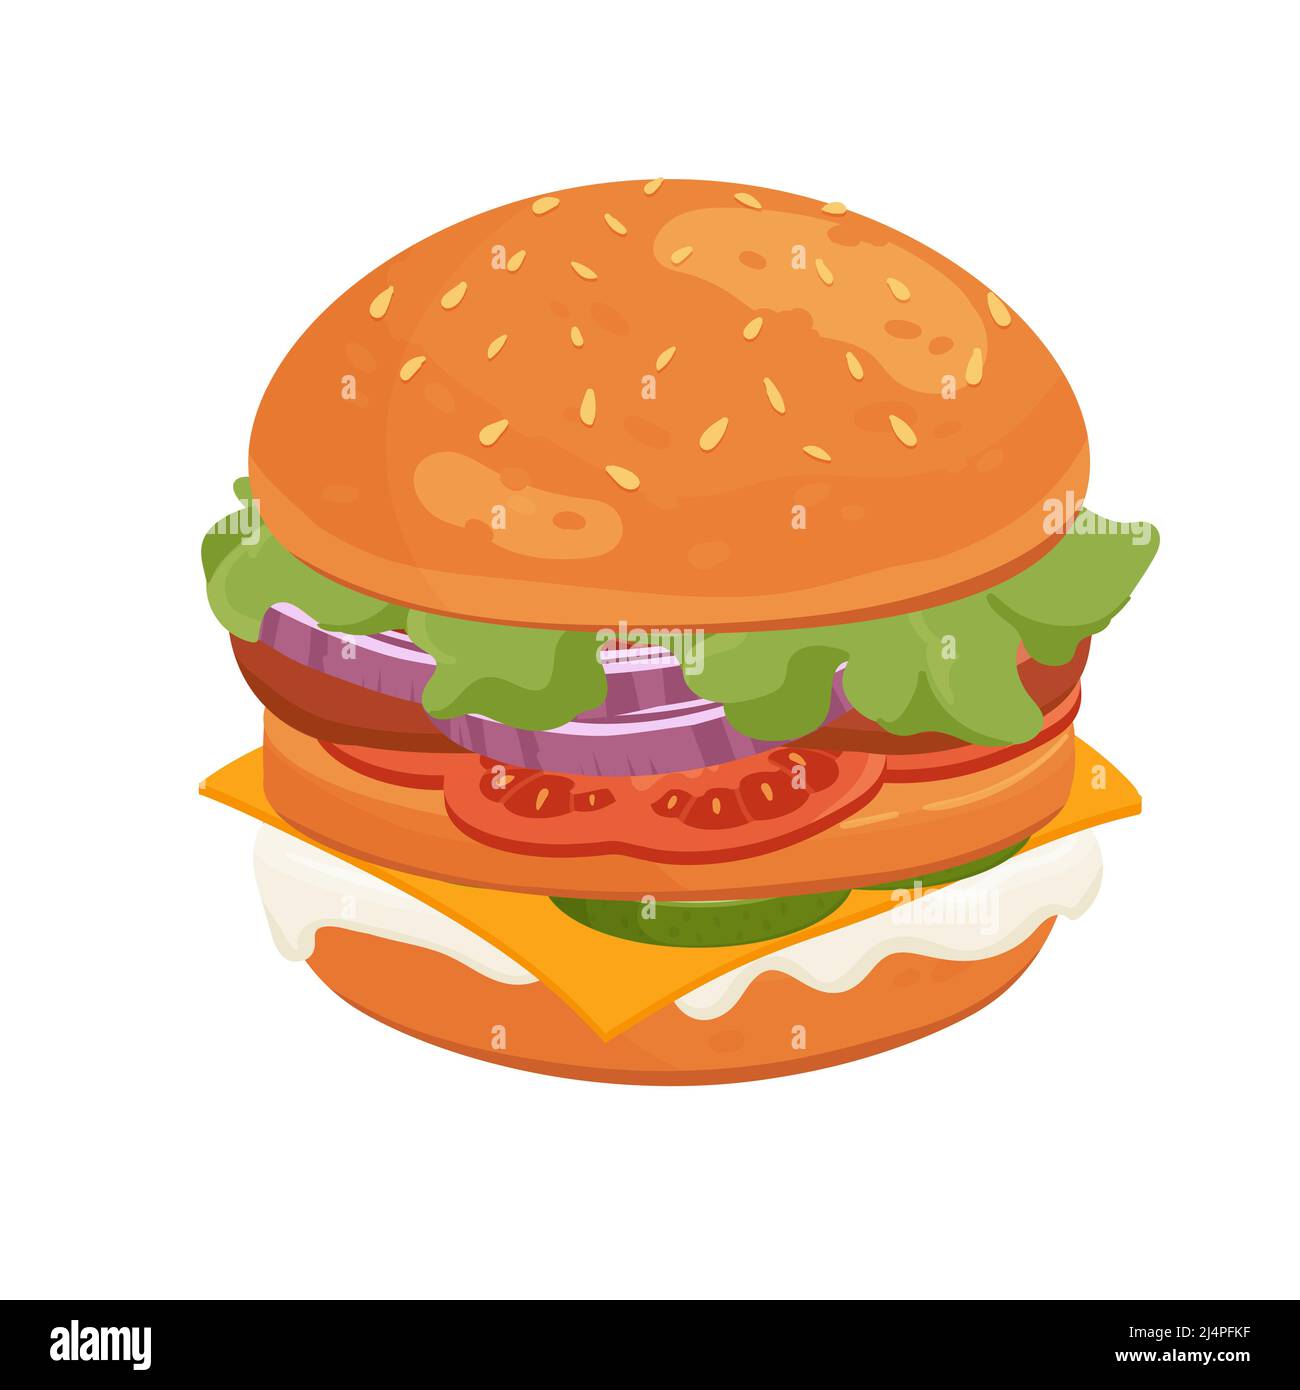 Delicious big hamburger with sesame seeds. American street fast food takeaway meal cartoon vector illustration Stock Vector